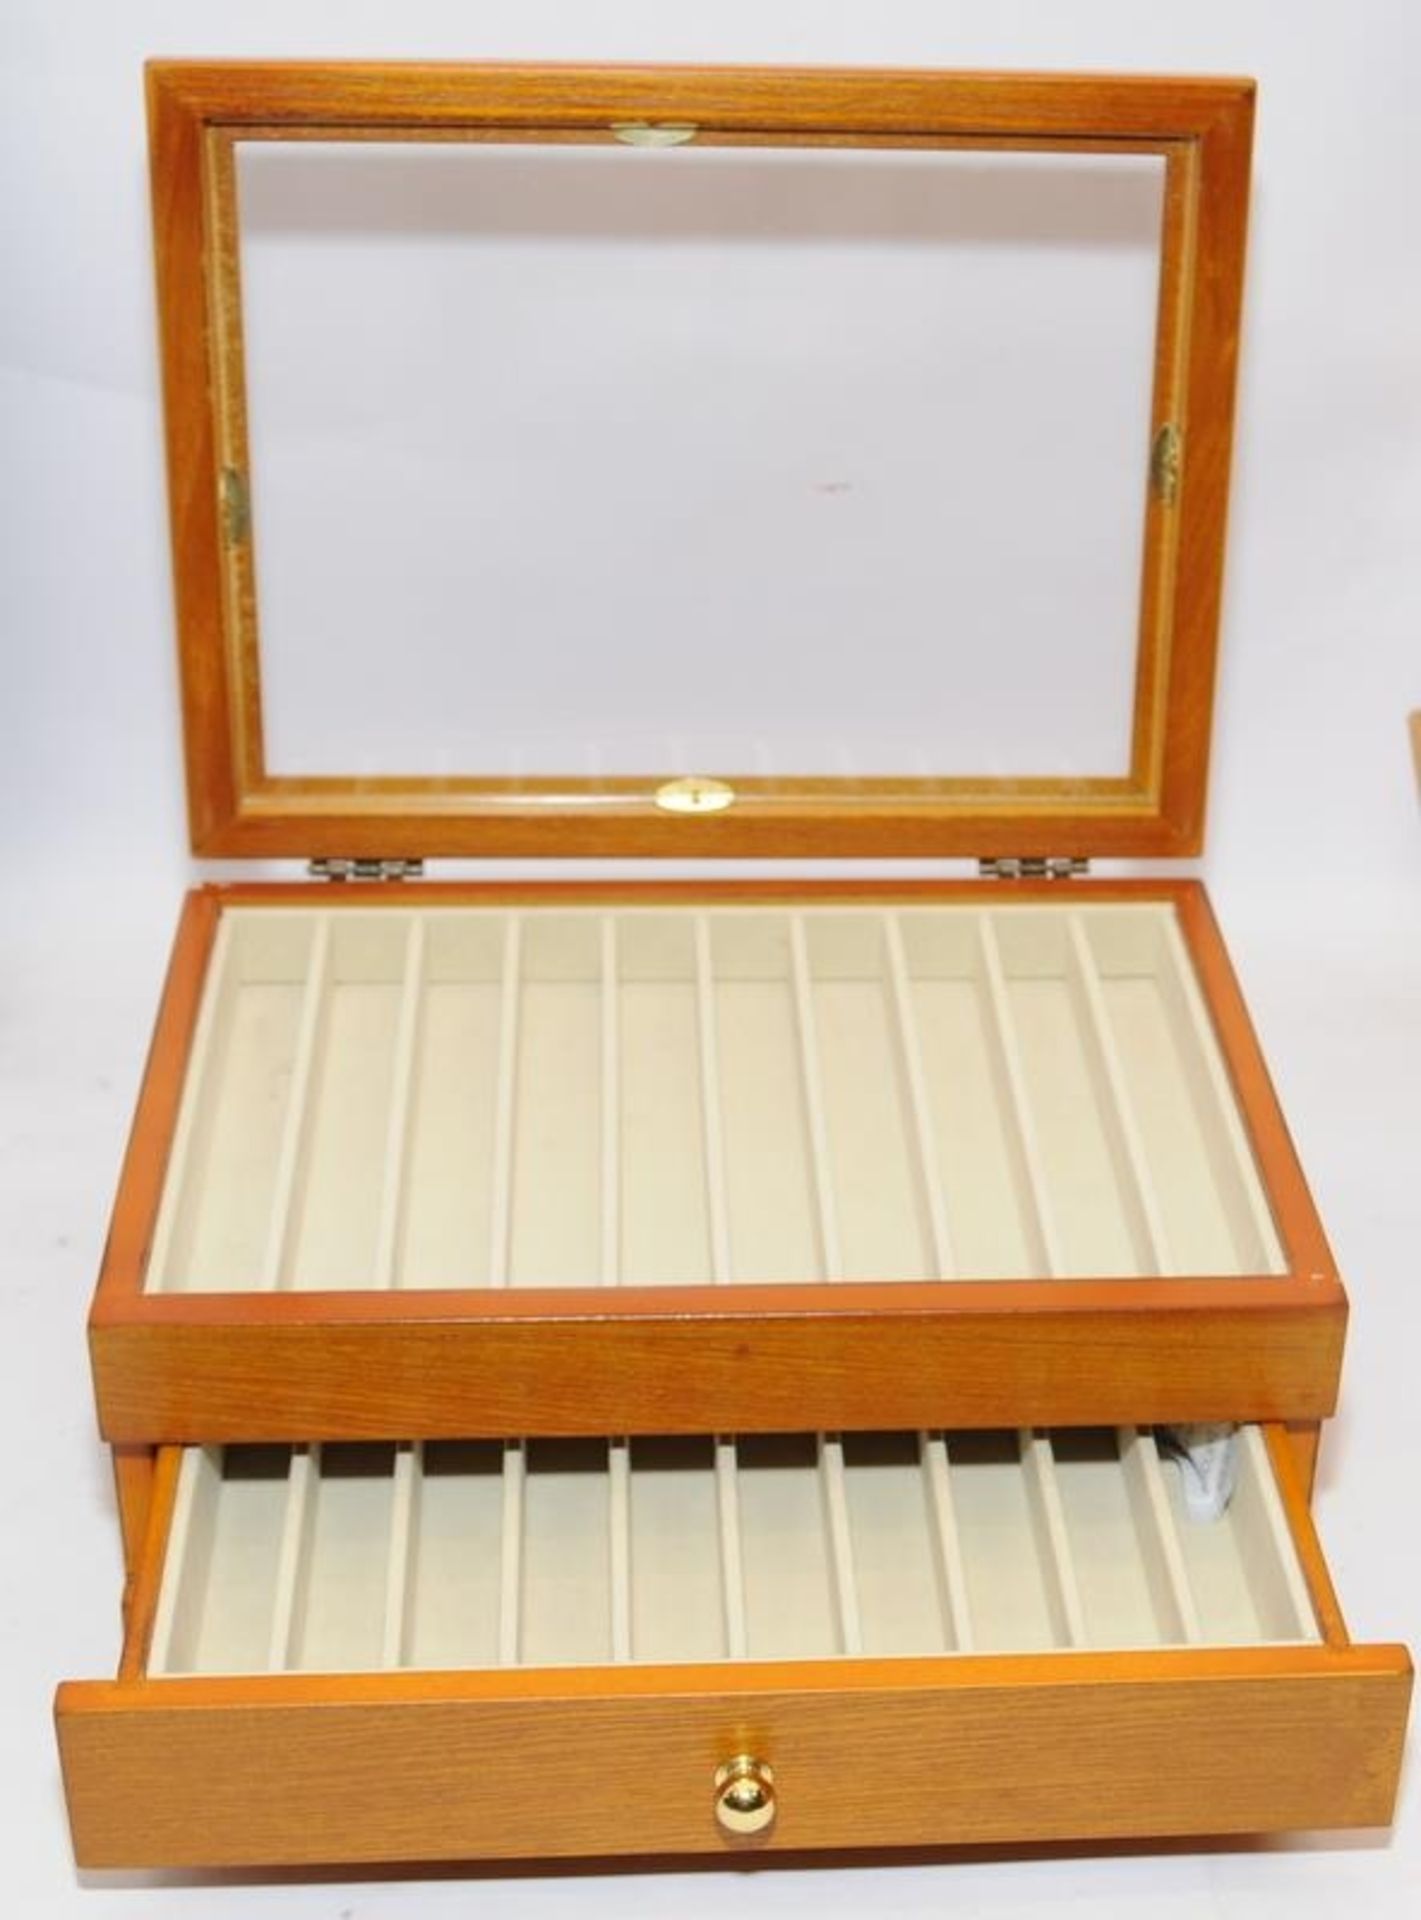 Quality Wancherpen International pen storage/display box with drawer under. Storage capacity for - Image 3 of 6